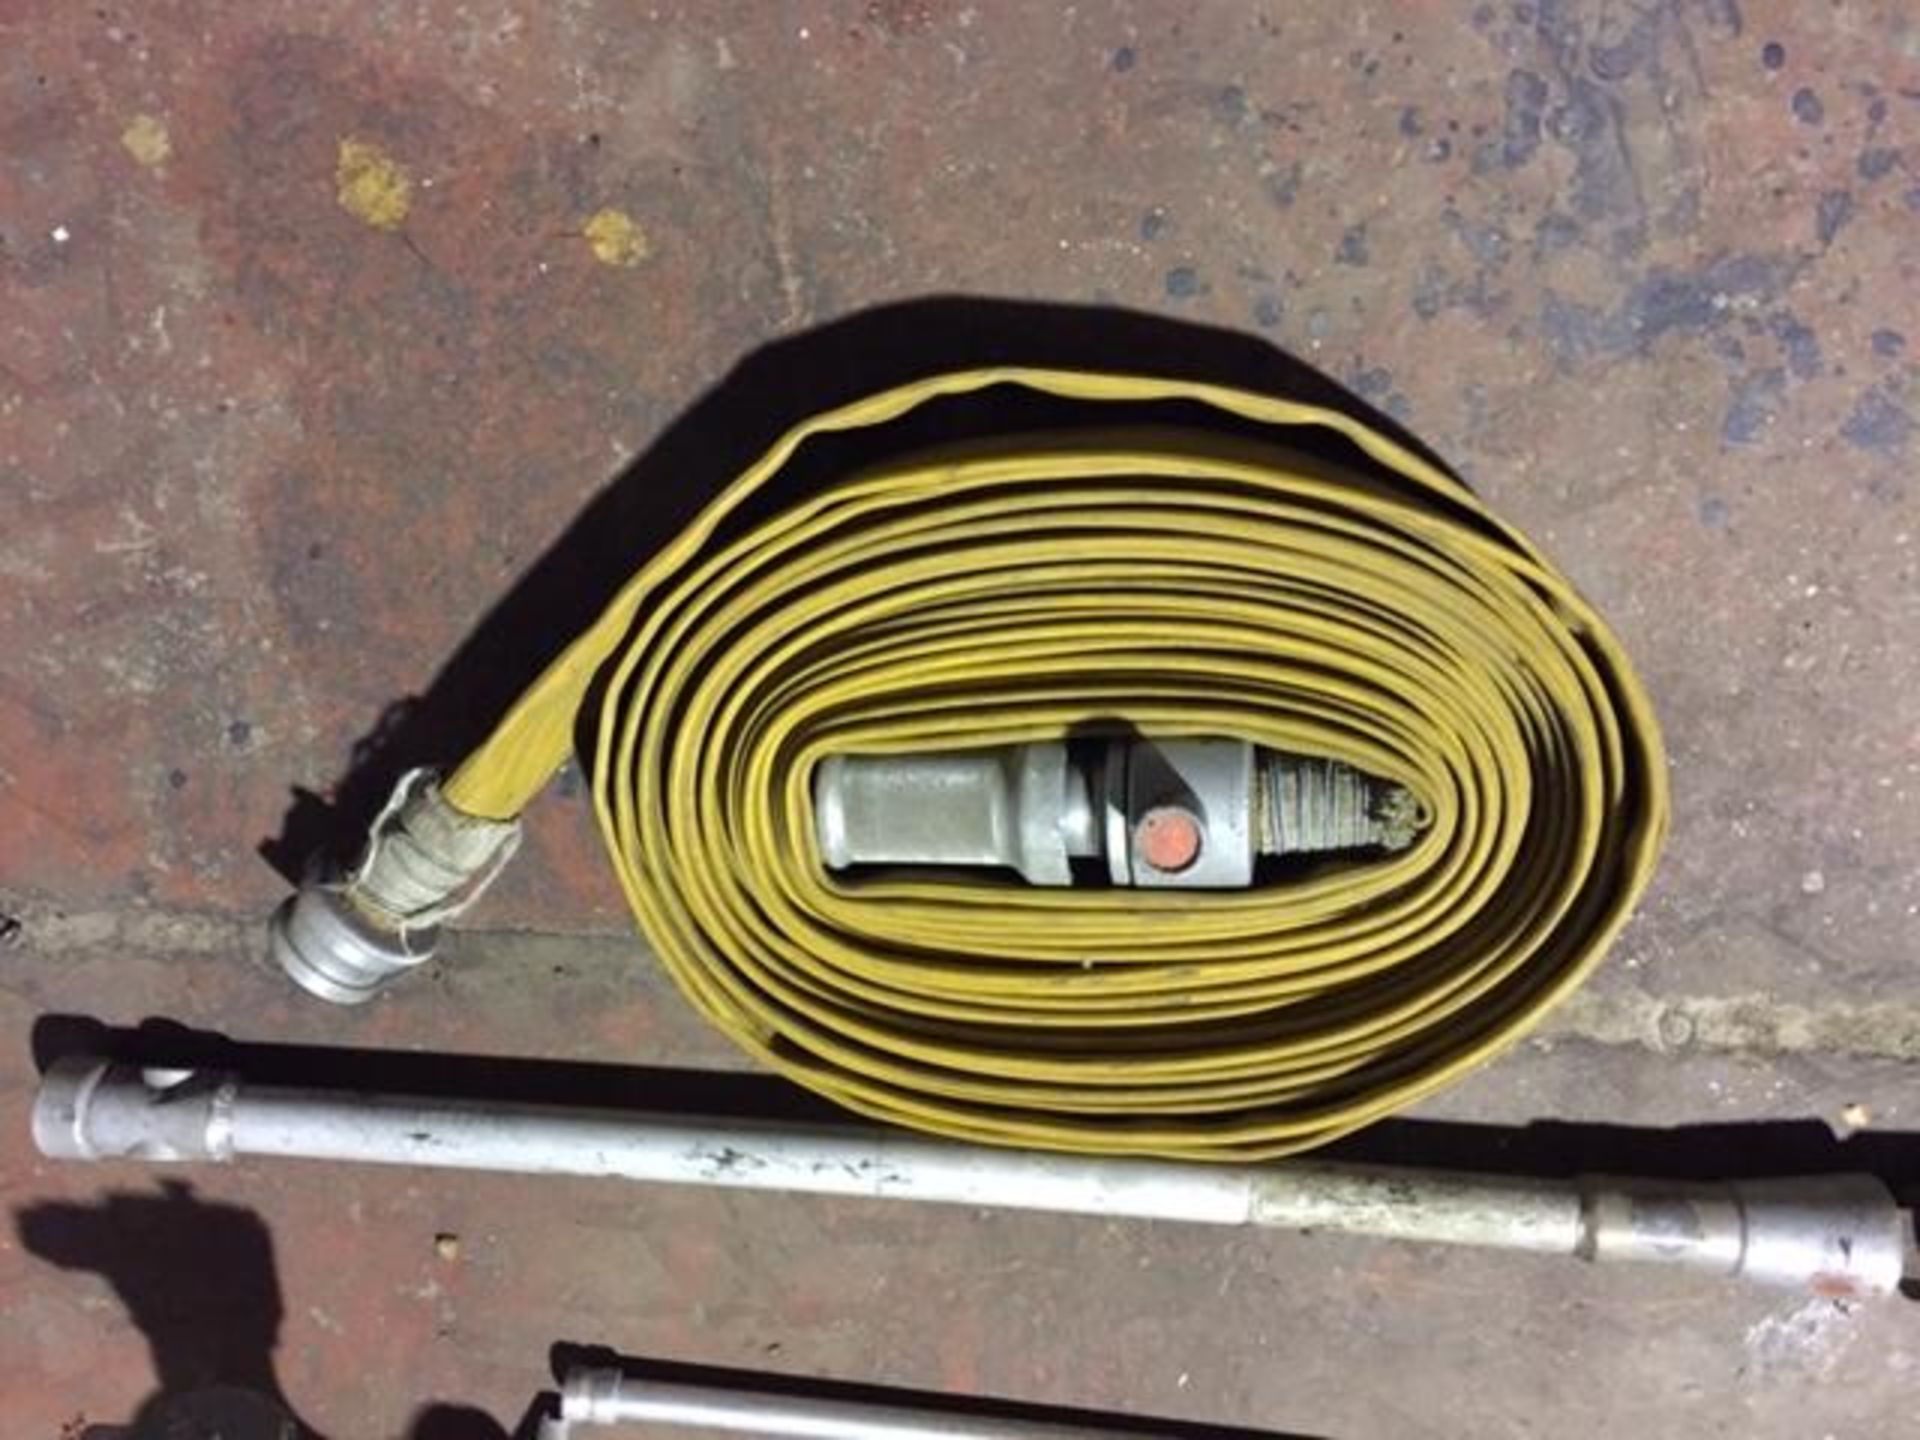 Water hydrant hose kit - Image 3 of 5